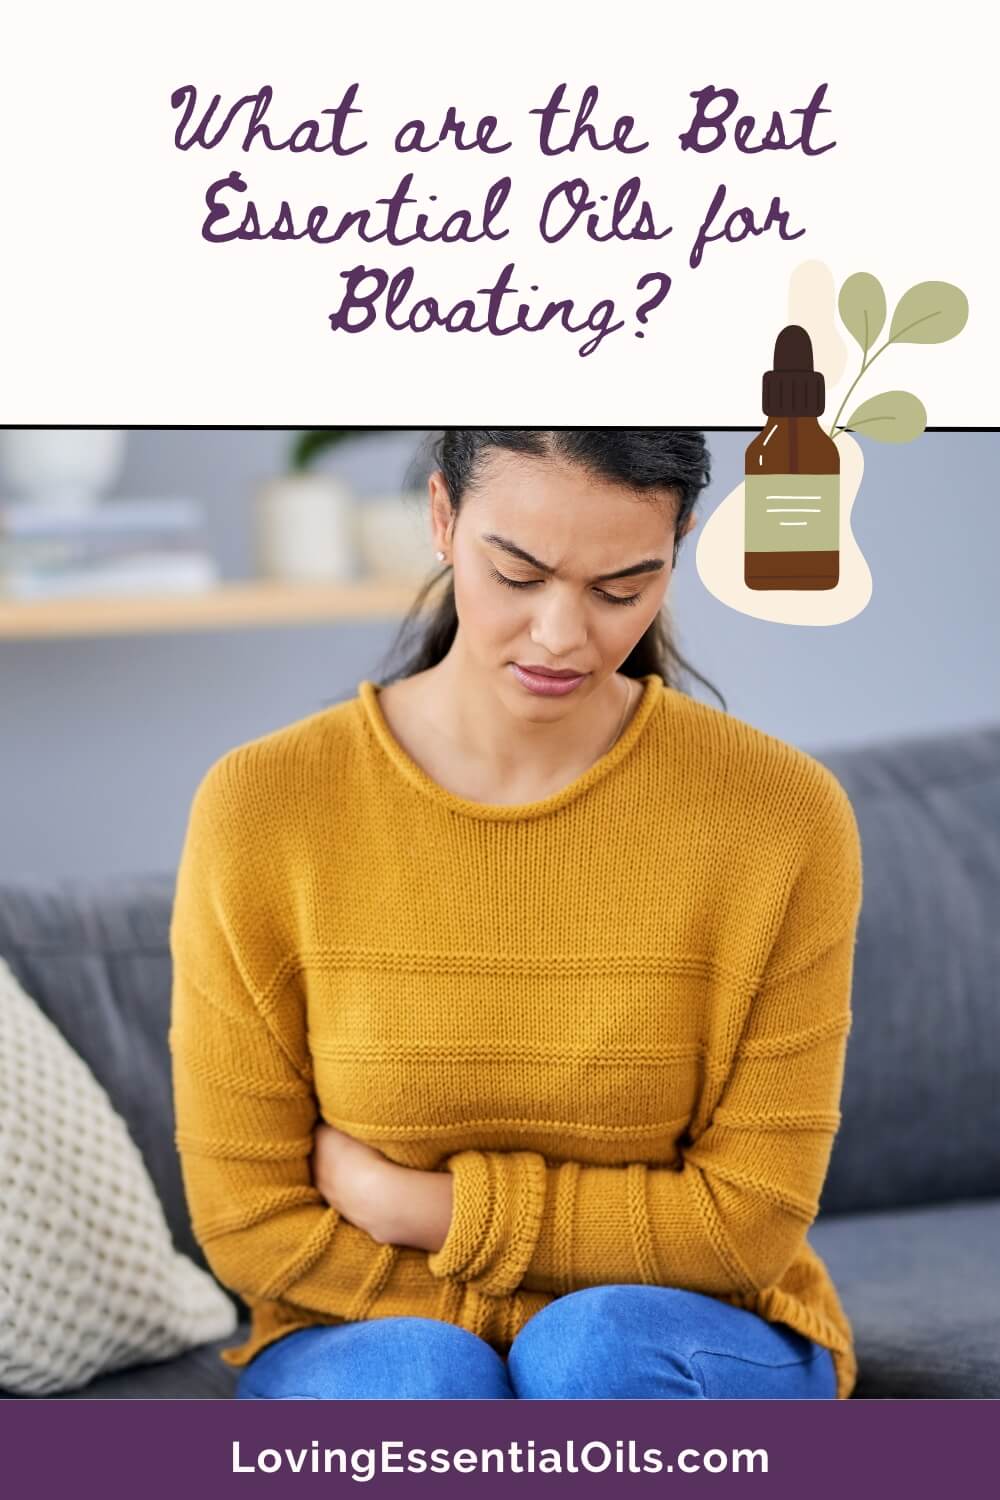 What are the Best Essential Oils for Bloating? Quick and Natural Relief